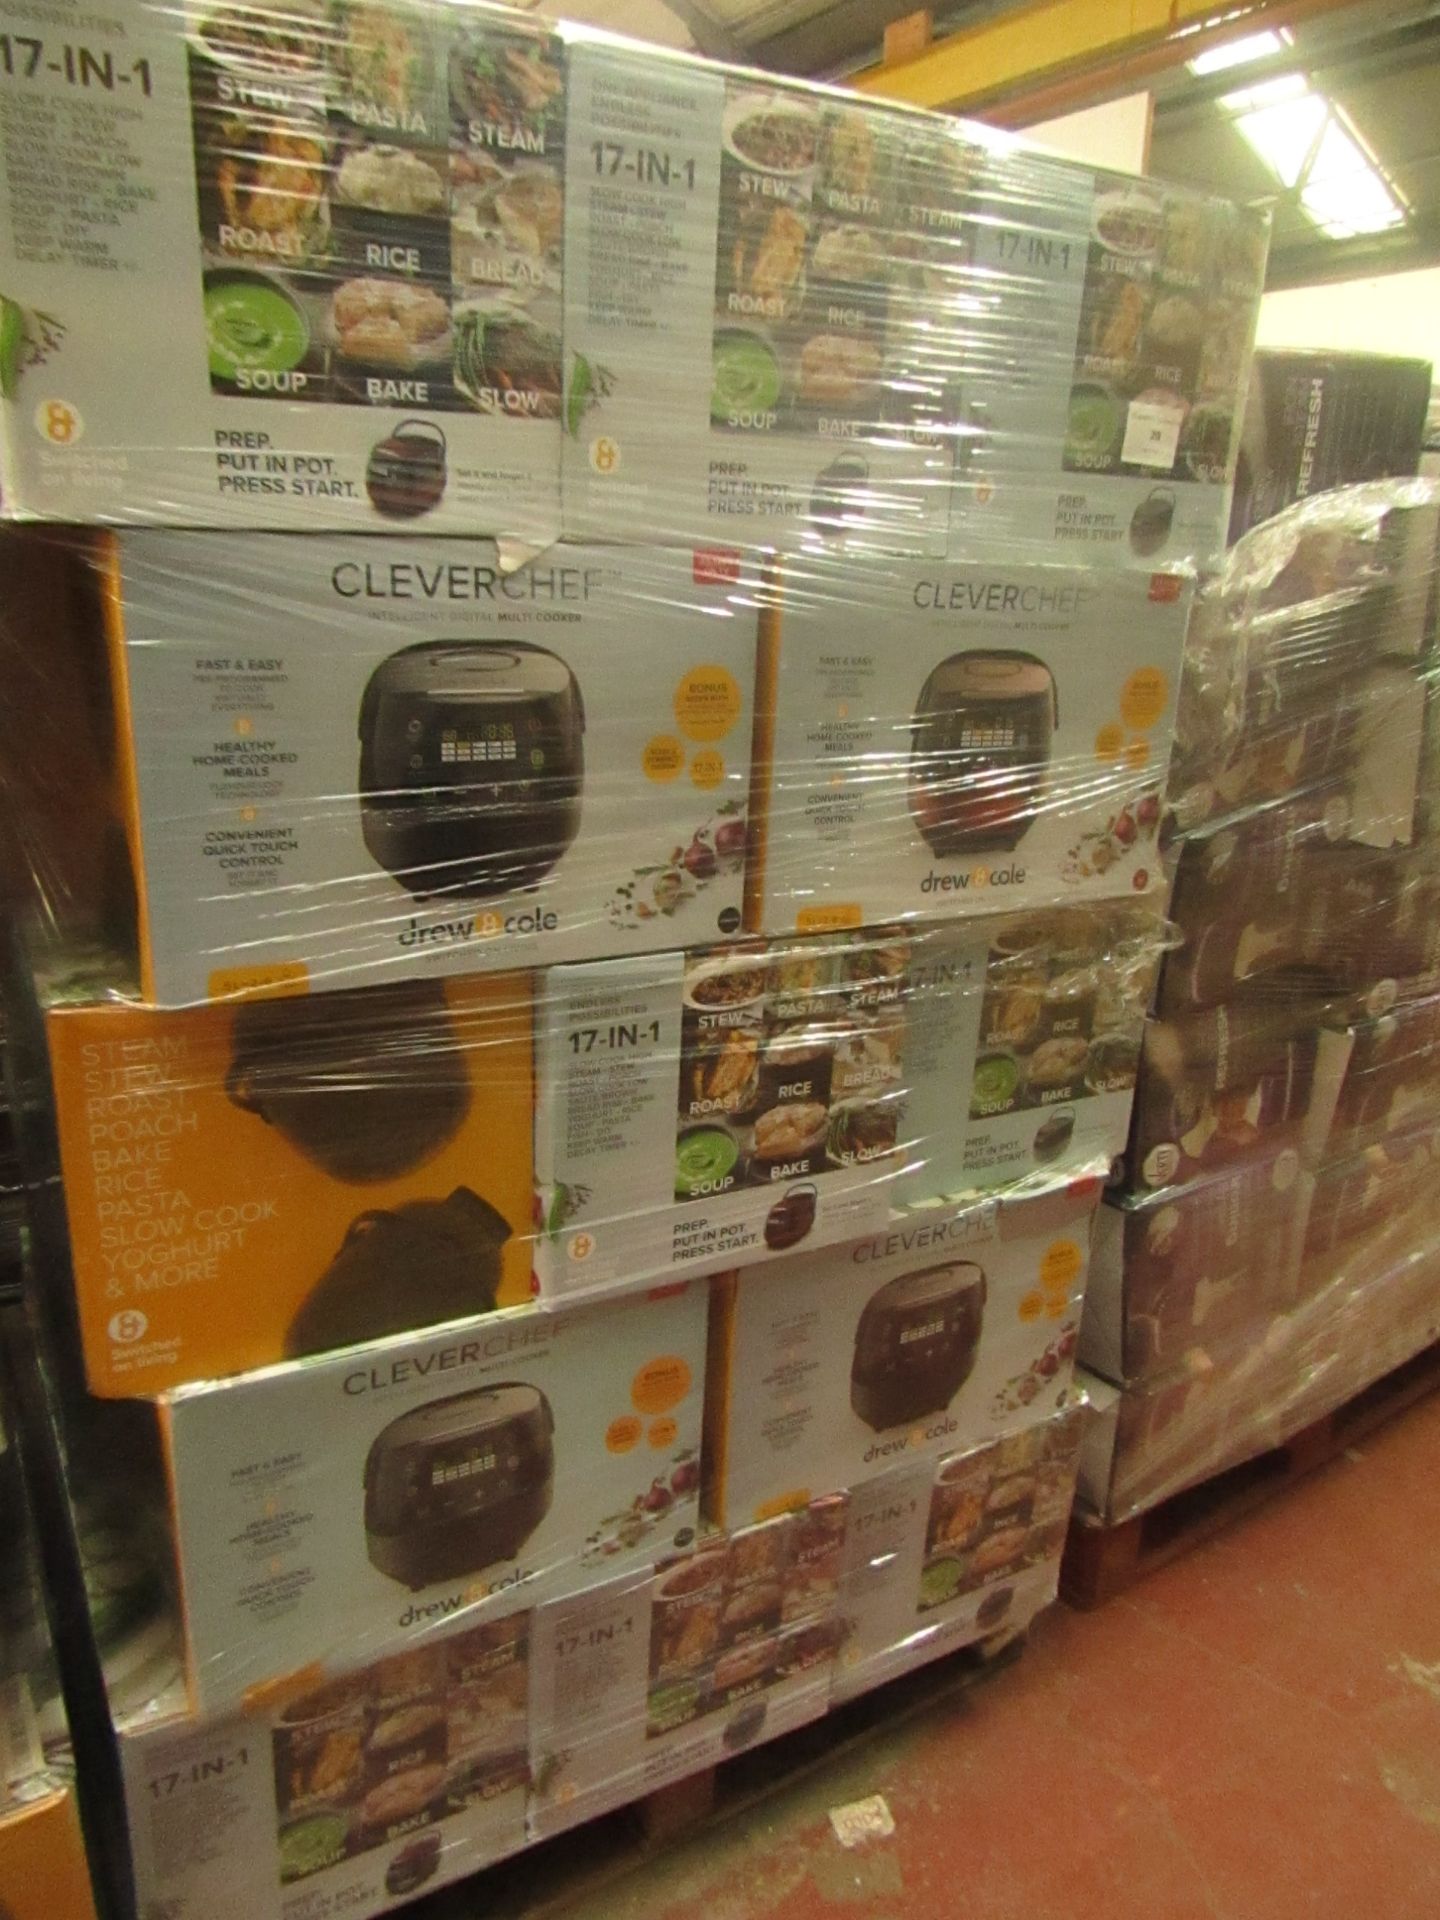 | 40x | Drew and Cole Clever Chef intelligent Multi cookers | unchecked and boxed | no online resale